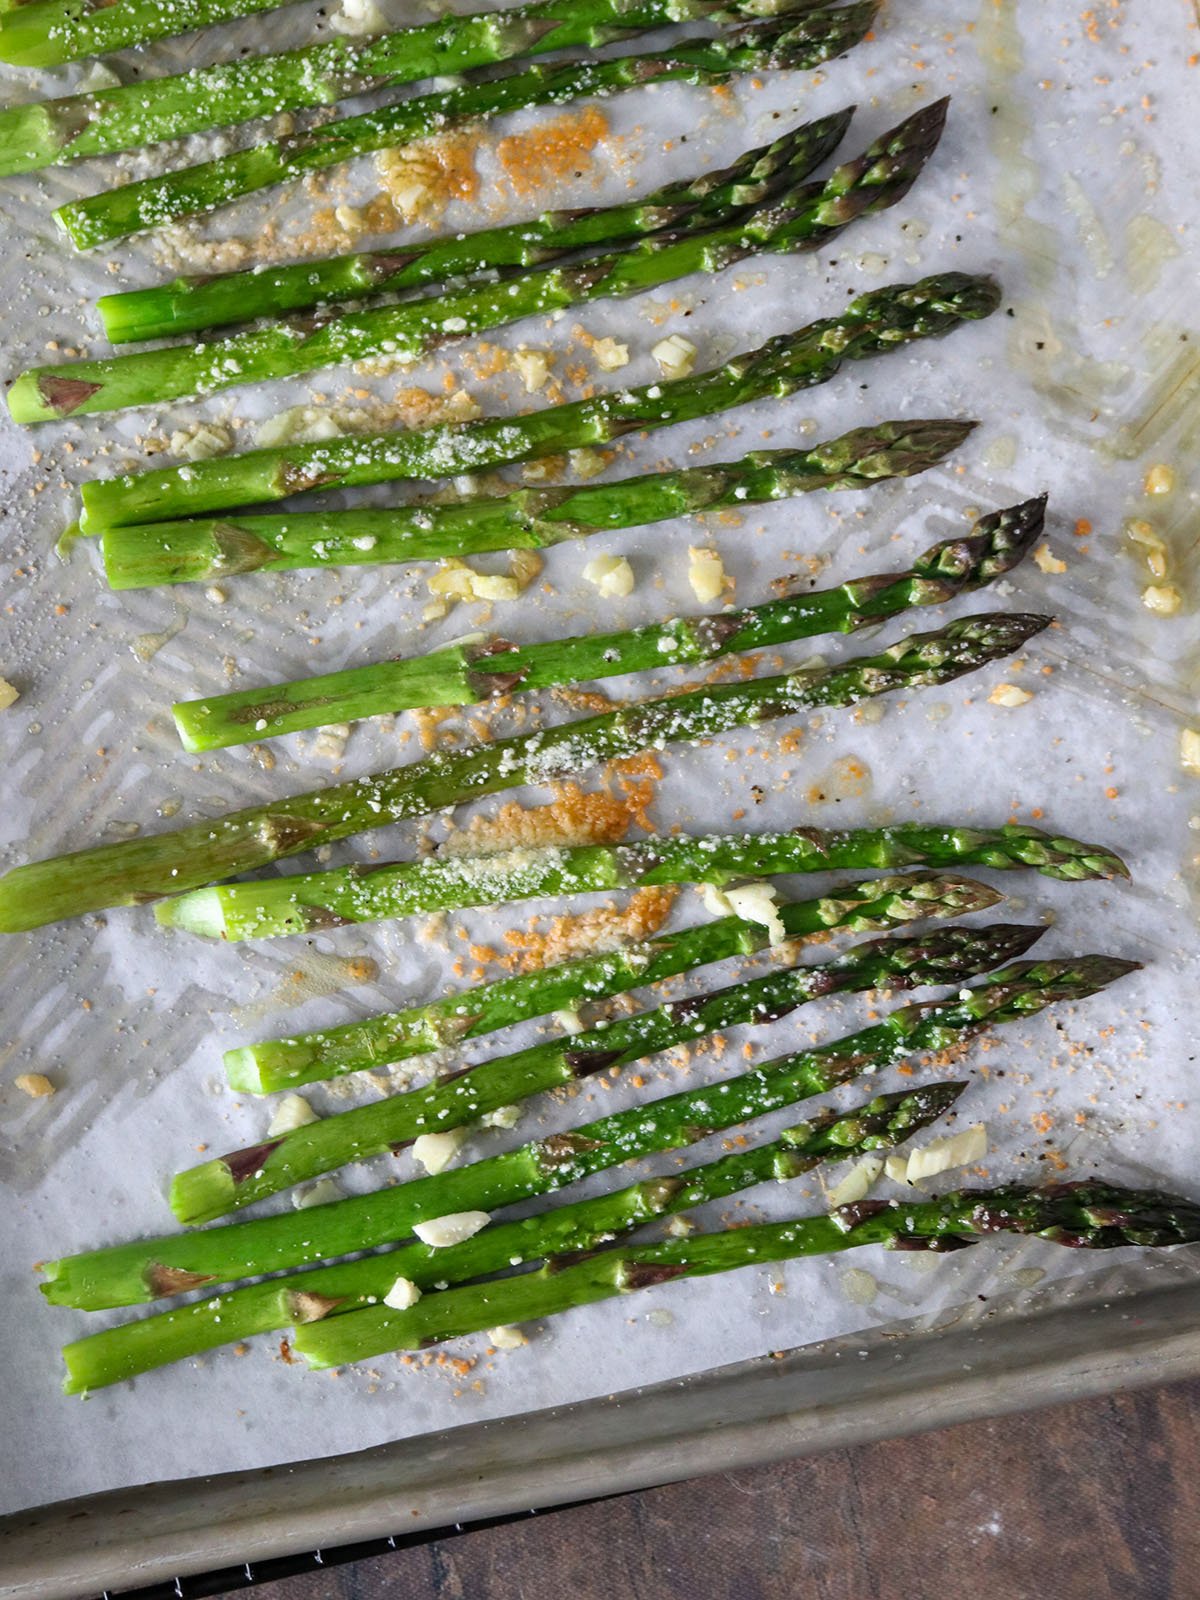 roasted asparagus with garlic and parmesan cheese on a baking sheet